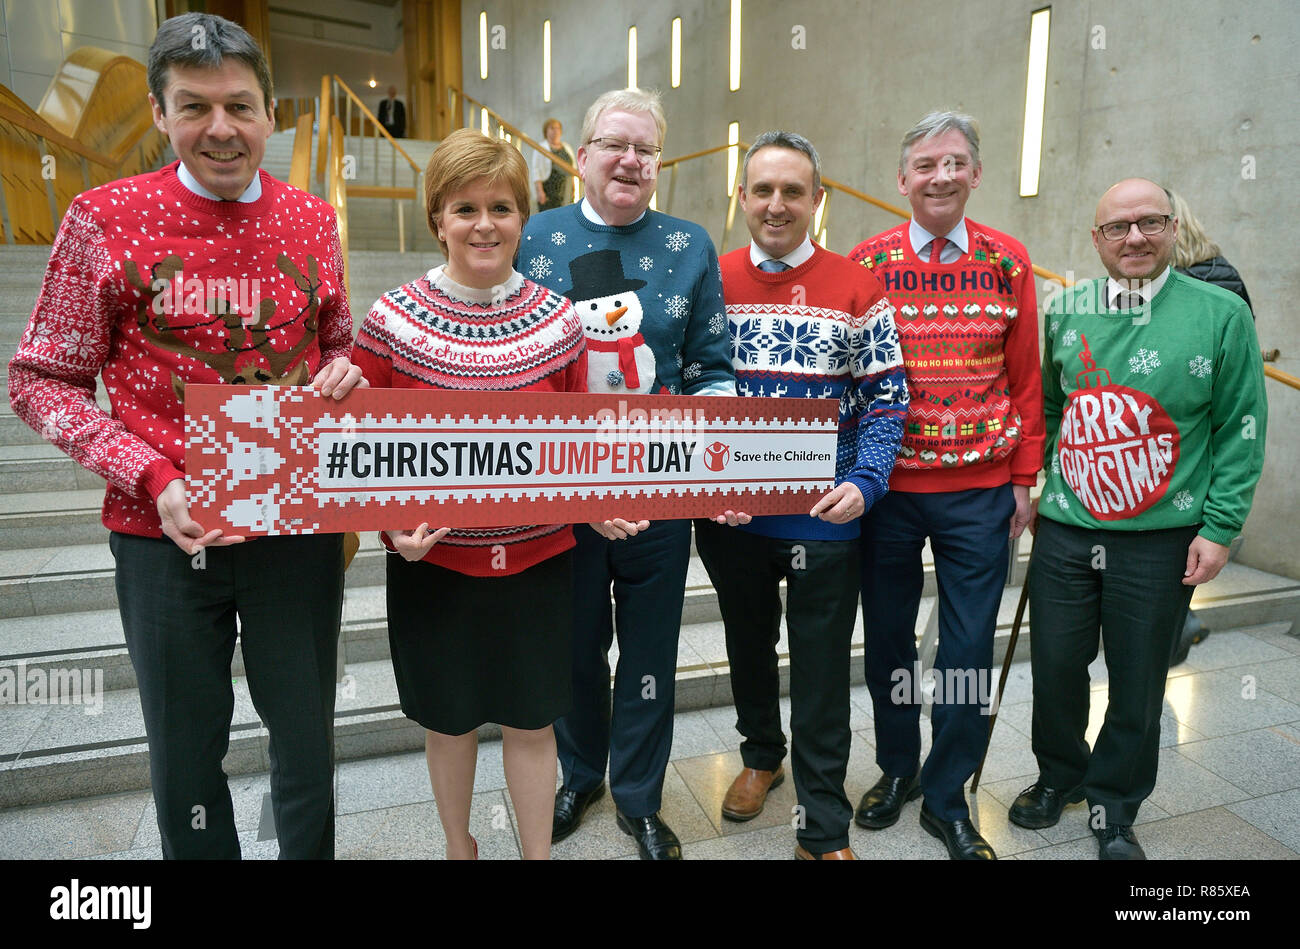 Save the Children's Christmas Jumper Day 2018. PICTURED L-R  at the Scottish Parliament with their Christmas jumpers on are Ken Macintosh msp,  Presiding Officer of the Scottish Parliament, First Minister Nicola Sturgeon (SNP), Jackson Carlaw  Scottish Conservative Deputy Leader, Alex Cole Hamilton MSP, Liberal Democrat, Richard Leonard  leader Scottish Labour Party and Patrick Harvie  co-convener of the Scottish Green Party. Stock Photo